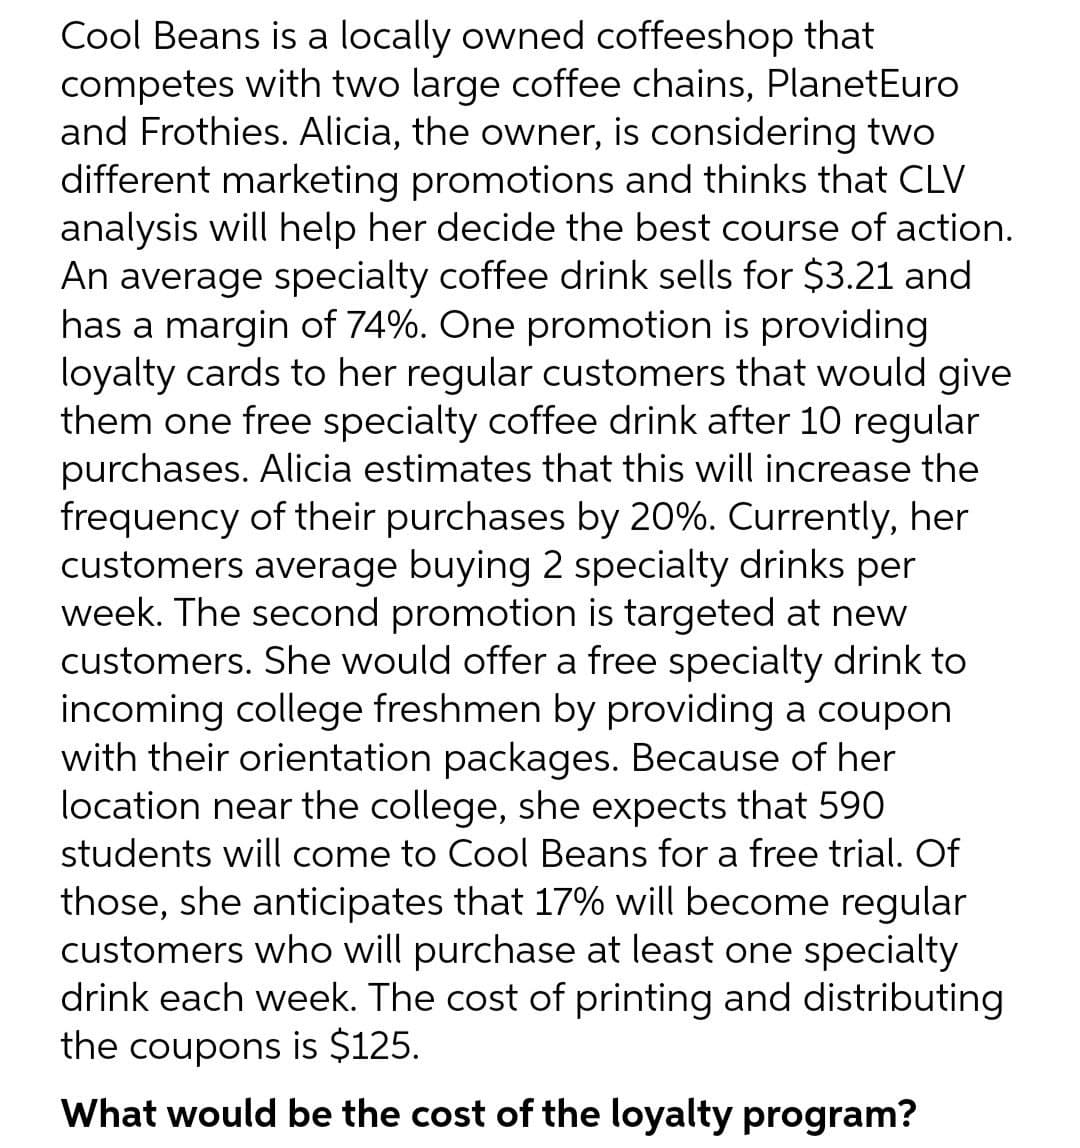 Cool Beans is a locally owned coffeeshop that
competes with two large coffee chains, PlanetEuro
and Frothies. Alicia, the owner, is considering two
different marketing promotions and thinks that CLV
analysis will help her decide the best course of action.
An average specialty coffee drink sells for $3.21 and
has a margin of 74%. One promotion is providing
loyalty cards to her regular customers that would give
them one free specialty coffee drink after 10 regular
purchases. Alicia estimates that this will increase the
frequency of their purchases by 20%. Currently, her
customers average buying 2 specialty drinks per
week. The second promotion is targeted at new
customers. She would offer a free specialty drink to
incoming college freshmen by providing a coupon
with their orientation packages. Because of her
location near the college, she expects that 590
students will come to Cool Beans for a free trial. Of
those, she anticipates that 17% will become regular
customers who will purchase at least one specialty
drink each week. The cost of printing and distributing
the coupons is $125.
What would be the cost of the loyalty program?